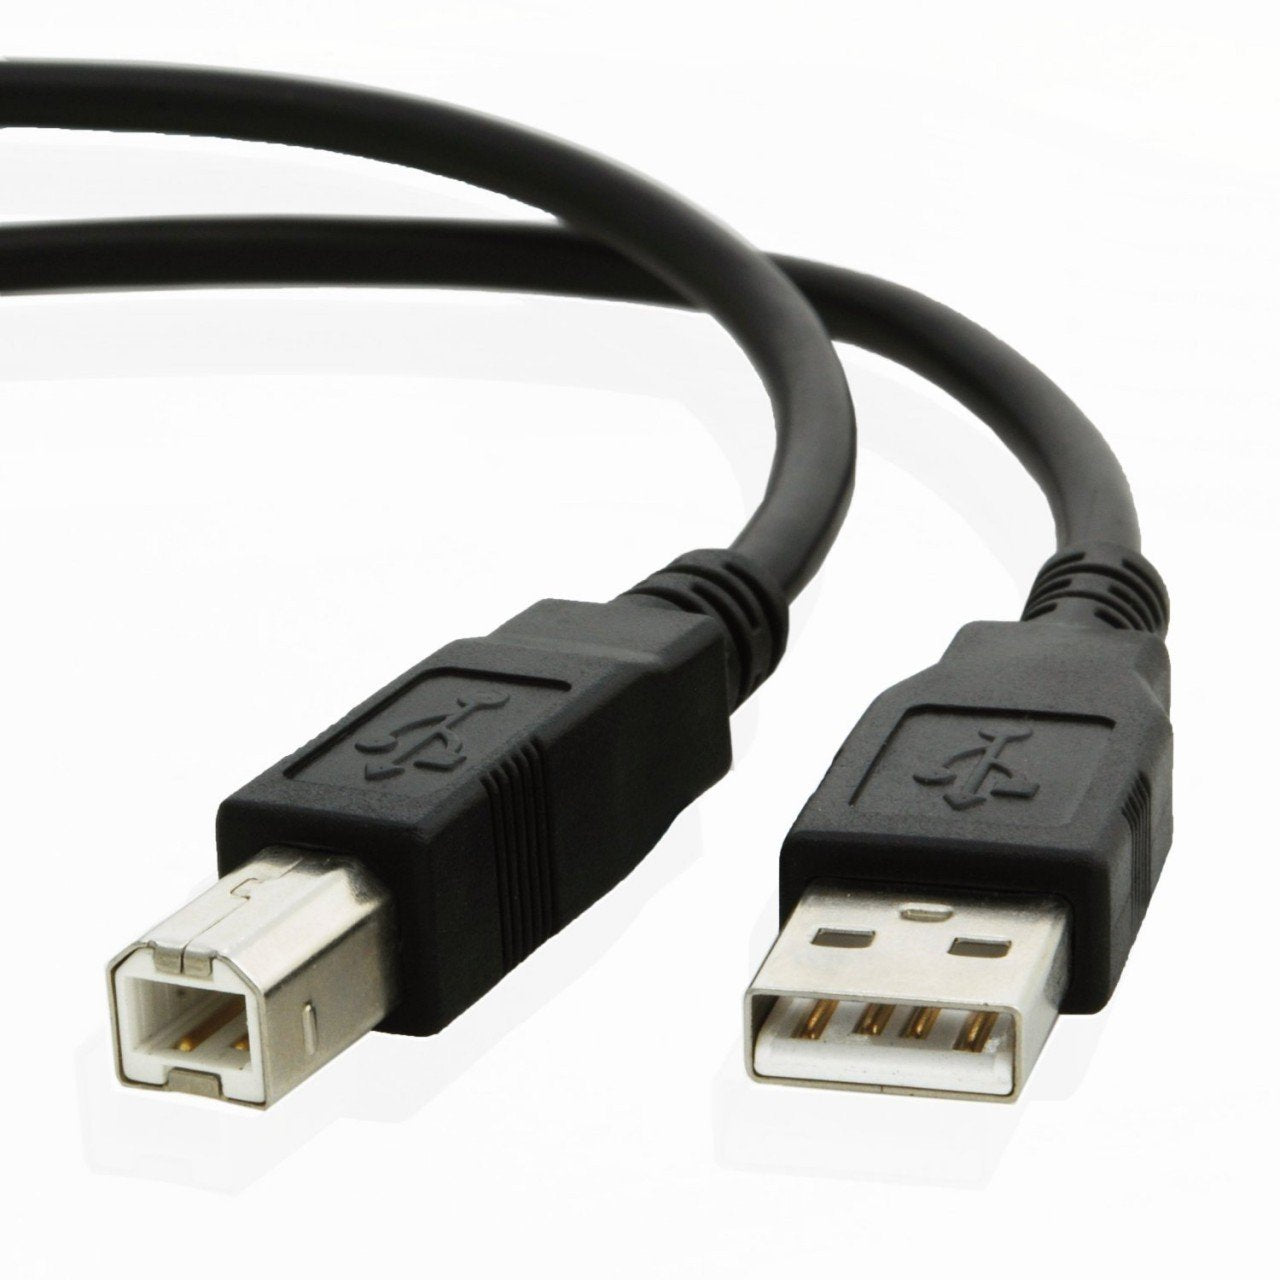 USB cable for Brother MFC-J775DW XL